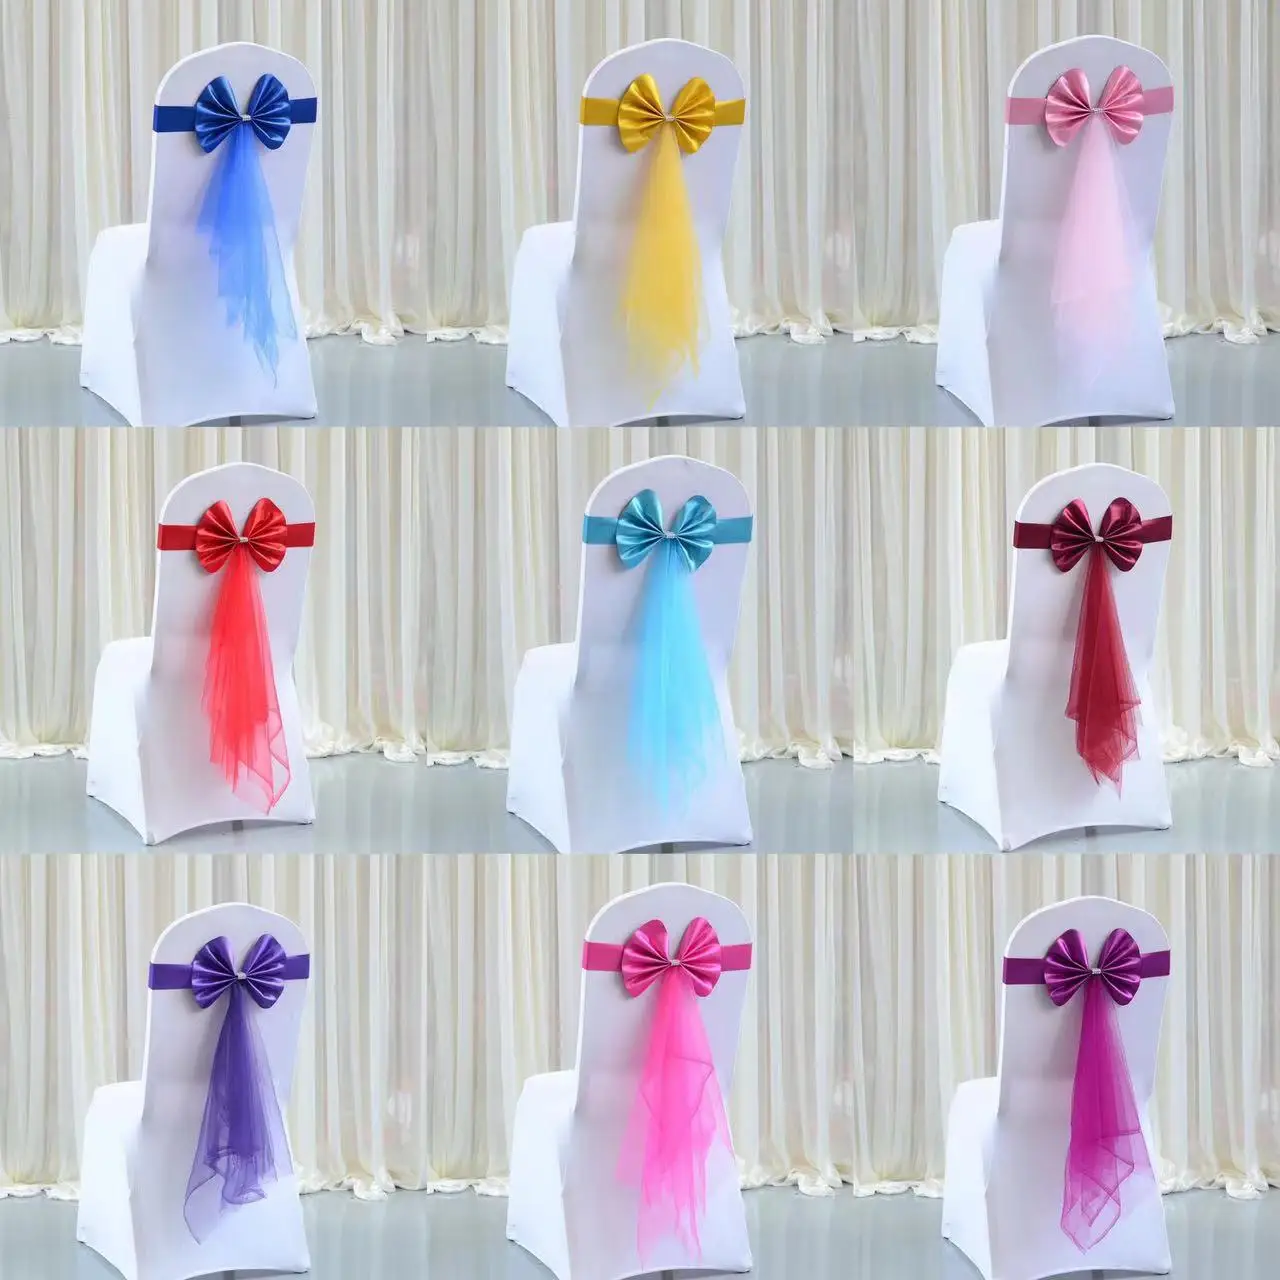 

Elastic Knot Multi Wedding Decor Sashes 50pcs Chair Banquet Party Sash Decoration Tie Bow Home Color Hotel Chair Hot Bowknot